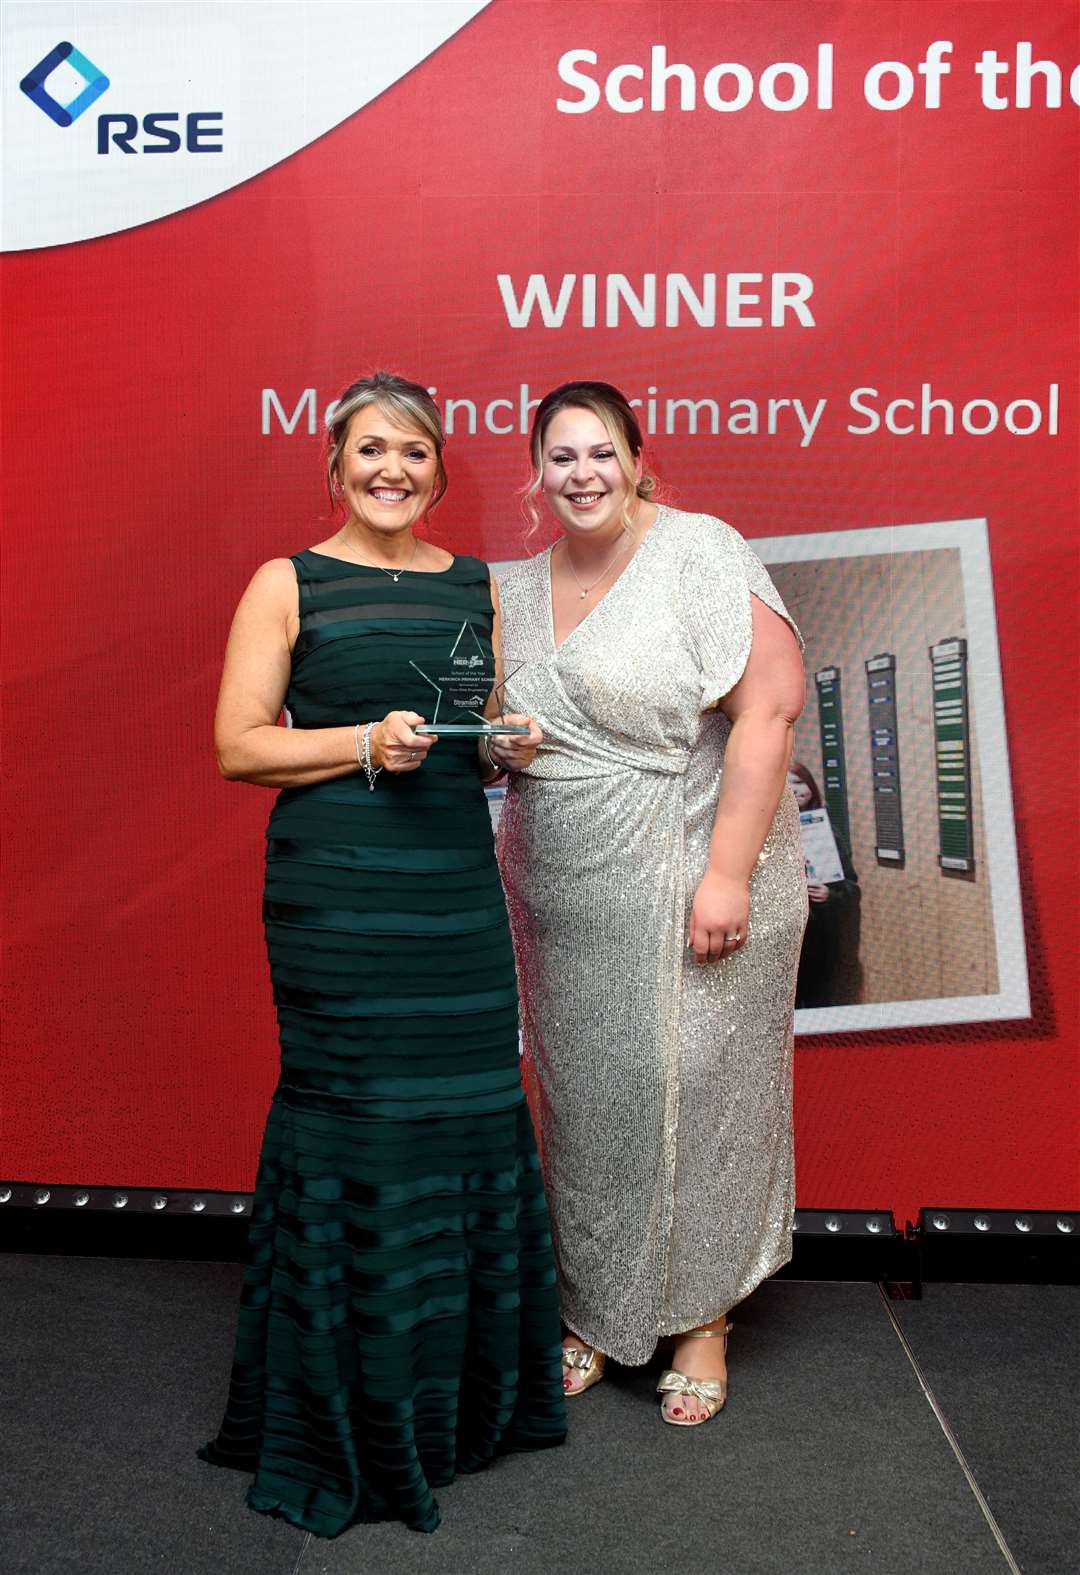 Merkinch Primary School won the School of the Year Award sponsored by Ross-shire Engineering. Picture: James Mackenzie.